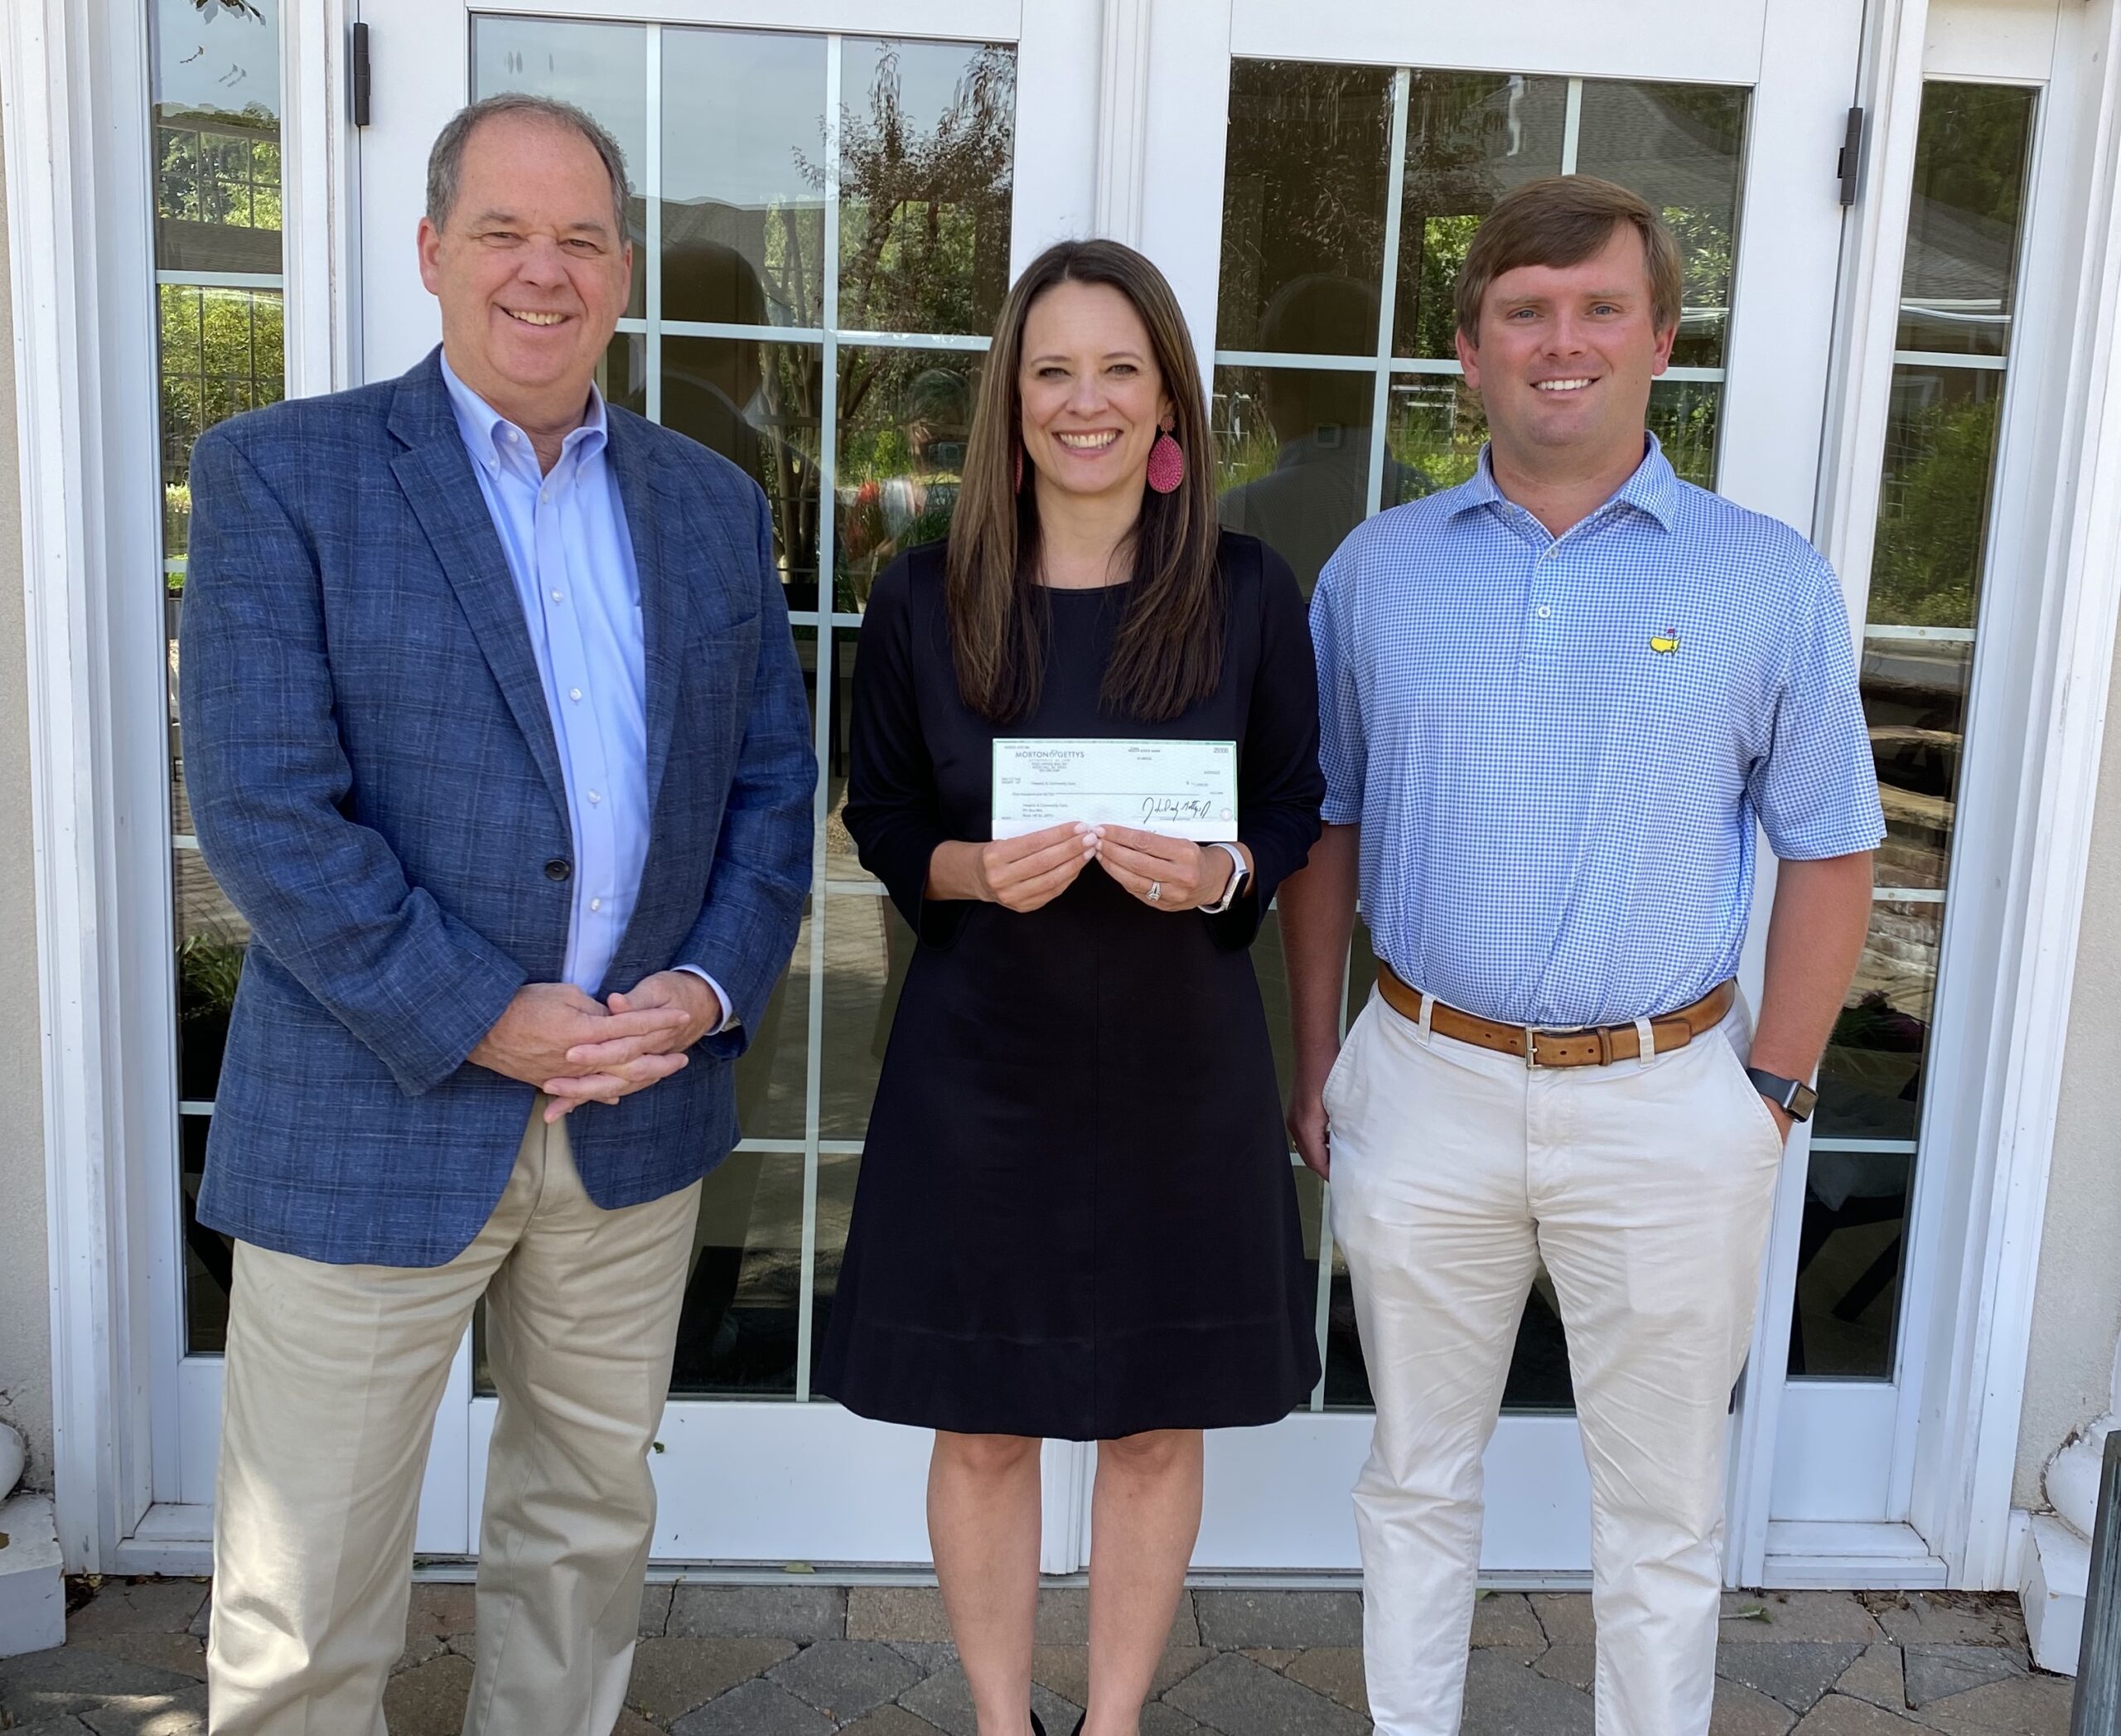 M&G Gives donates $1,000 to Hospice & Community Care during match campaign